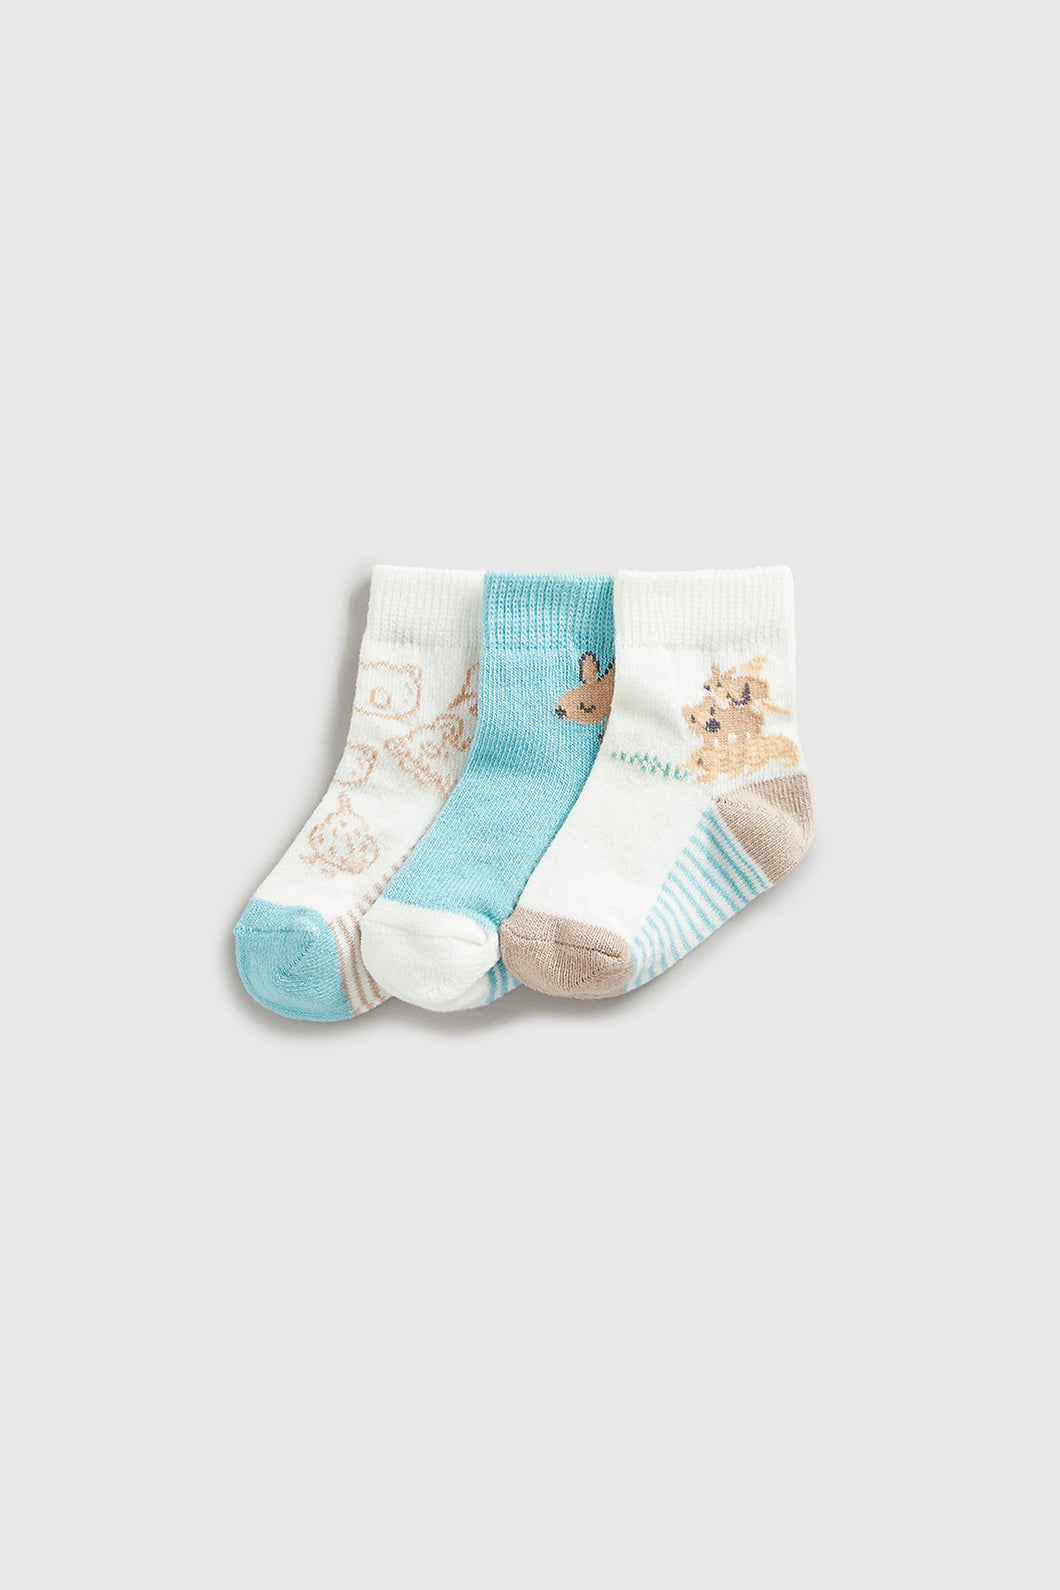 Mothercare Aussie Friends Baby Socks - 3 Pack